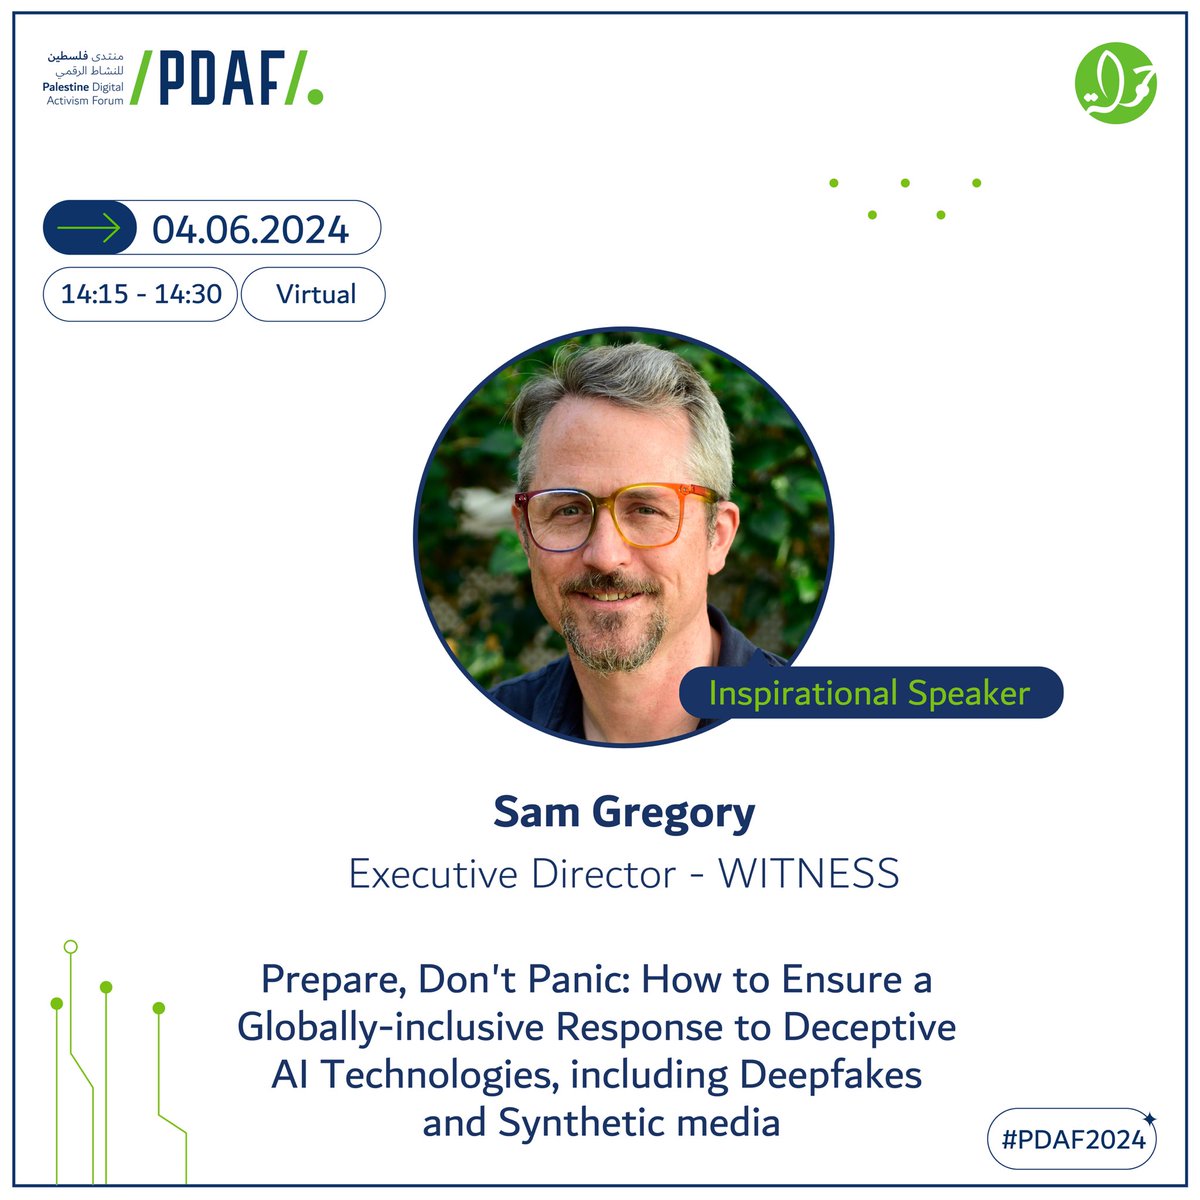 📣 Stay tuned for the inspirational speaker talk in first day of the Palestine Digital Activism Forum (PDAF 2024), Sam Gregory - Executive Director of @witnessorg 📝 Reserve your seat now: pdaf.net #PDAF2024